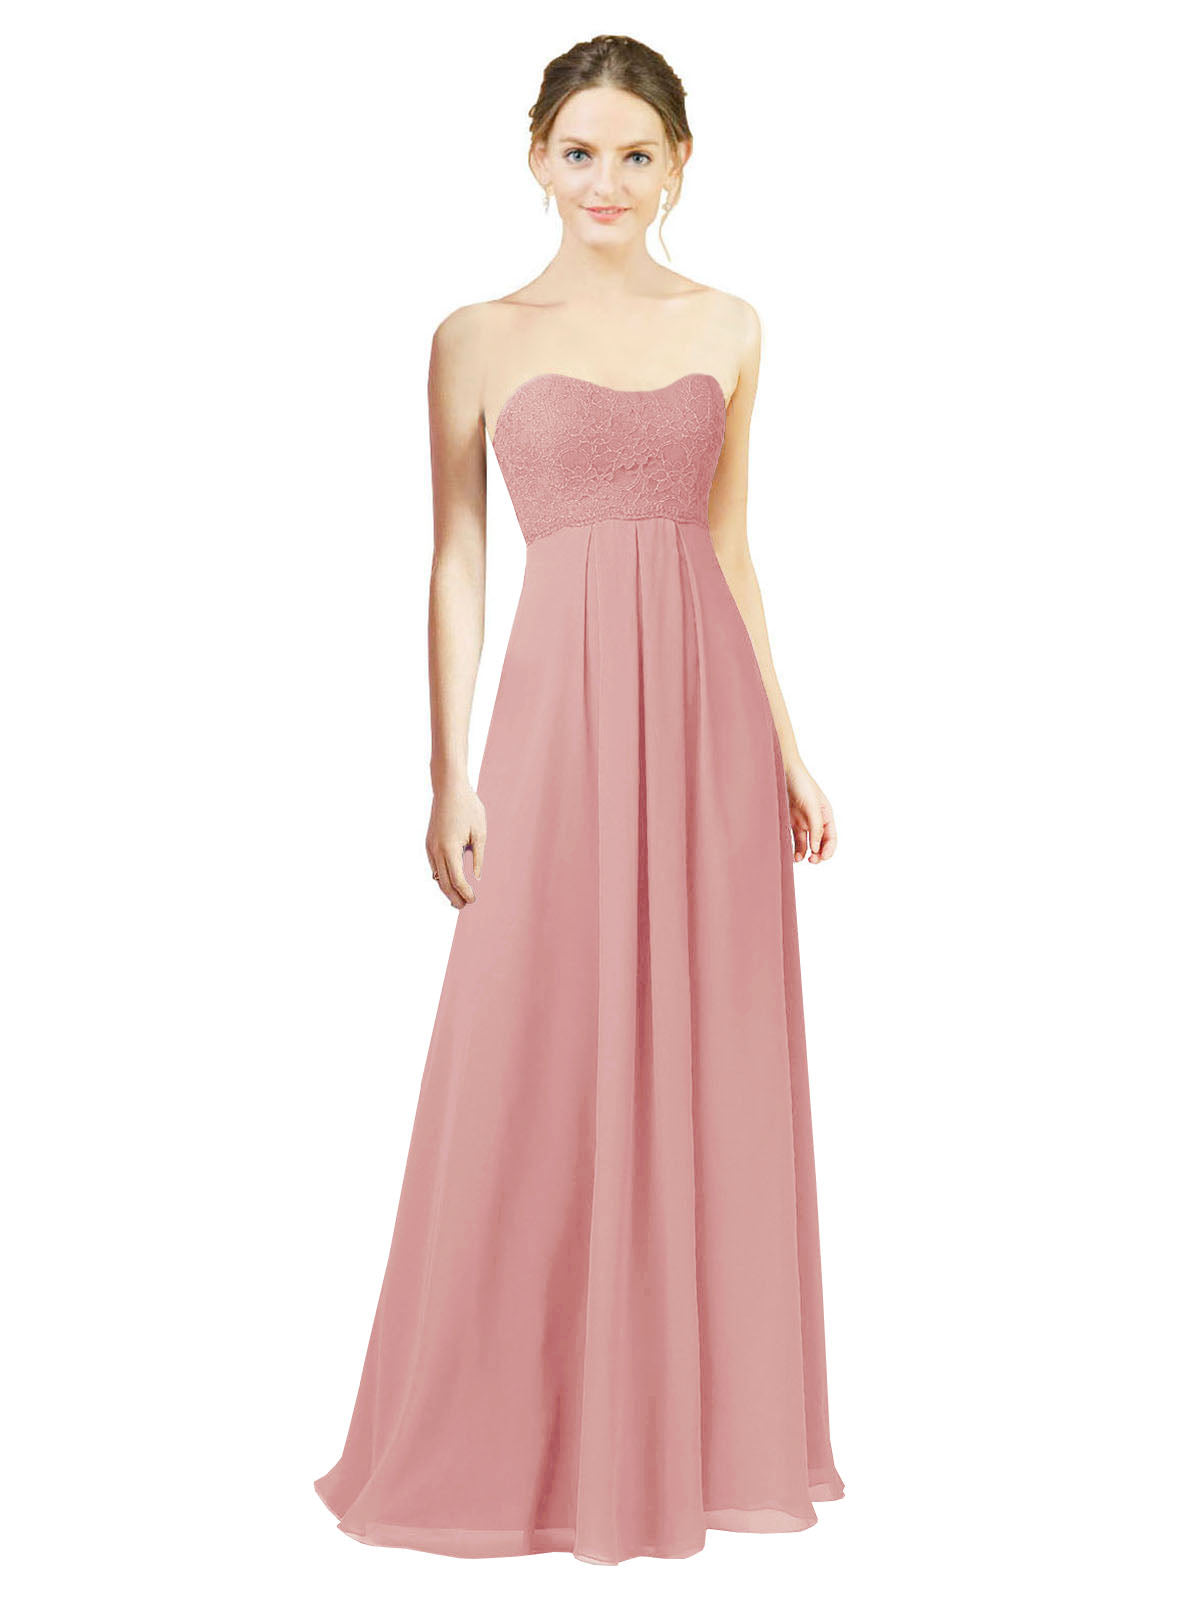 Bliss A-Line Sweetheart Strapless Long Bridesmaid Dress Melany